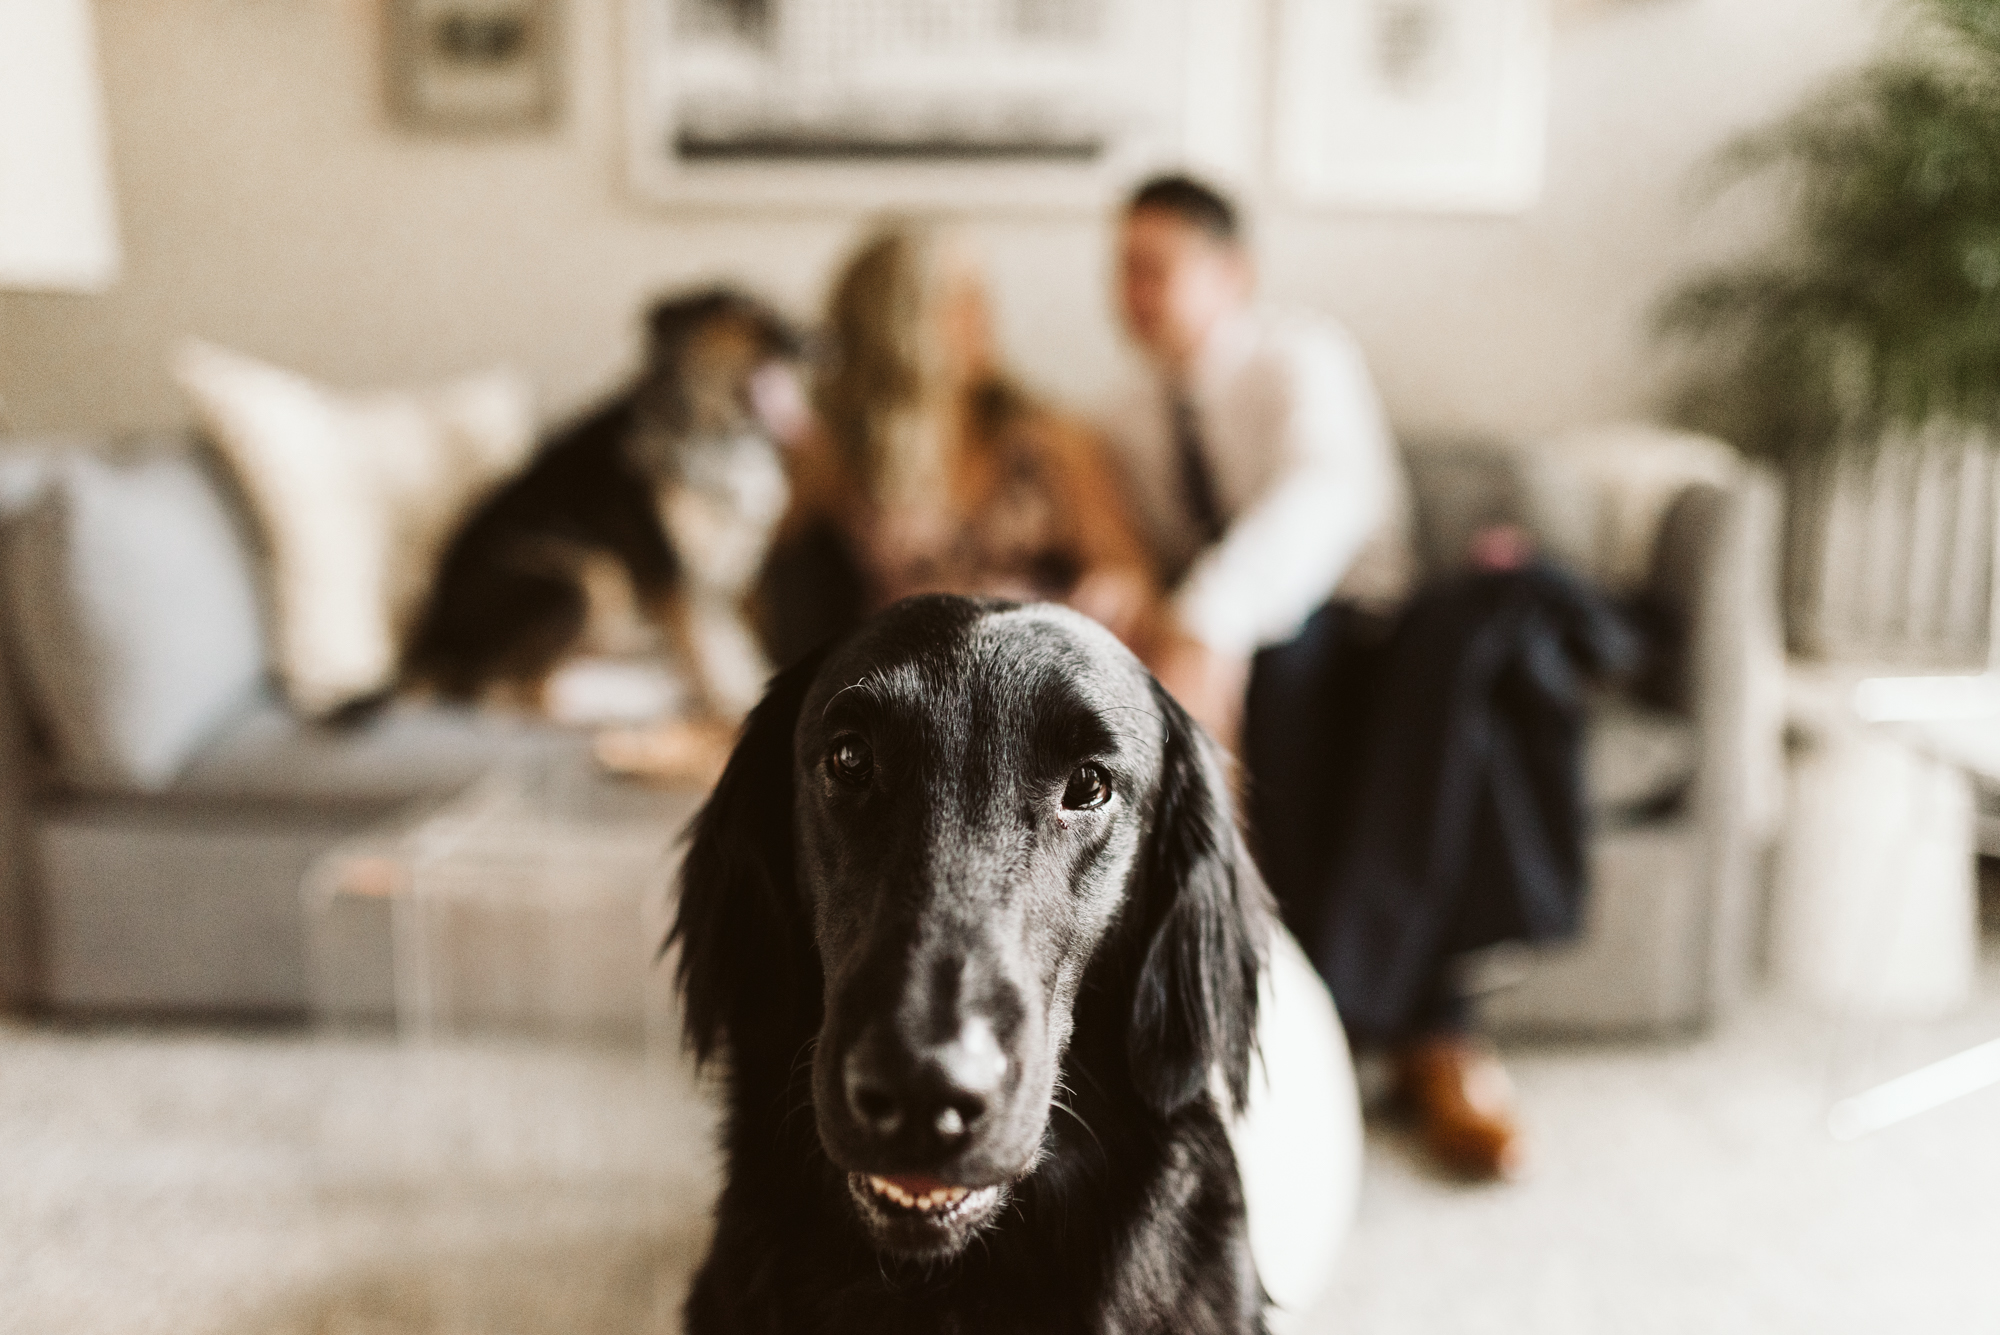 Pop-up Ceremony, Outdoor Wedding, Casual, Simple, Lake Roland, Baltimore, Maryland Wedding Photographer, Laid Back, Bride and Groom at Home with Dogs, Dog Portrait